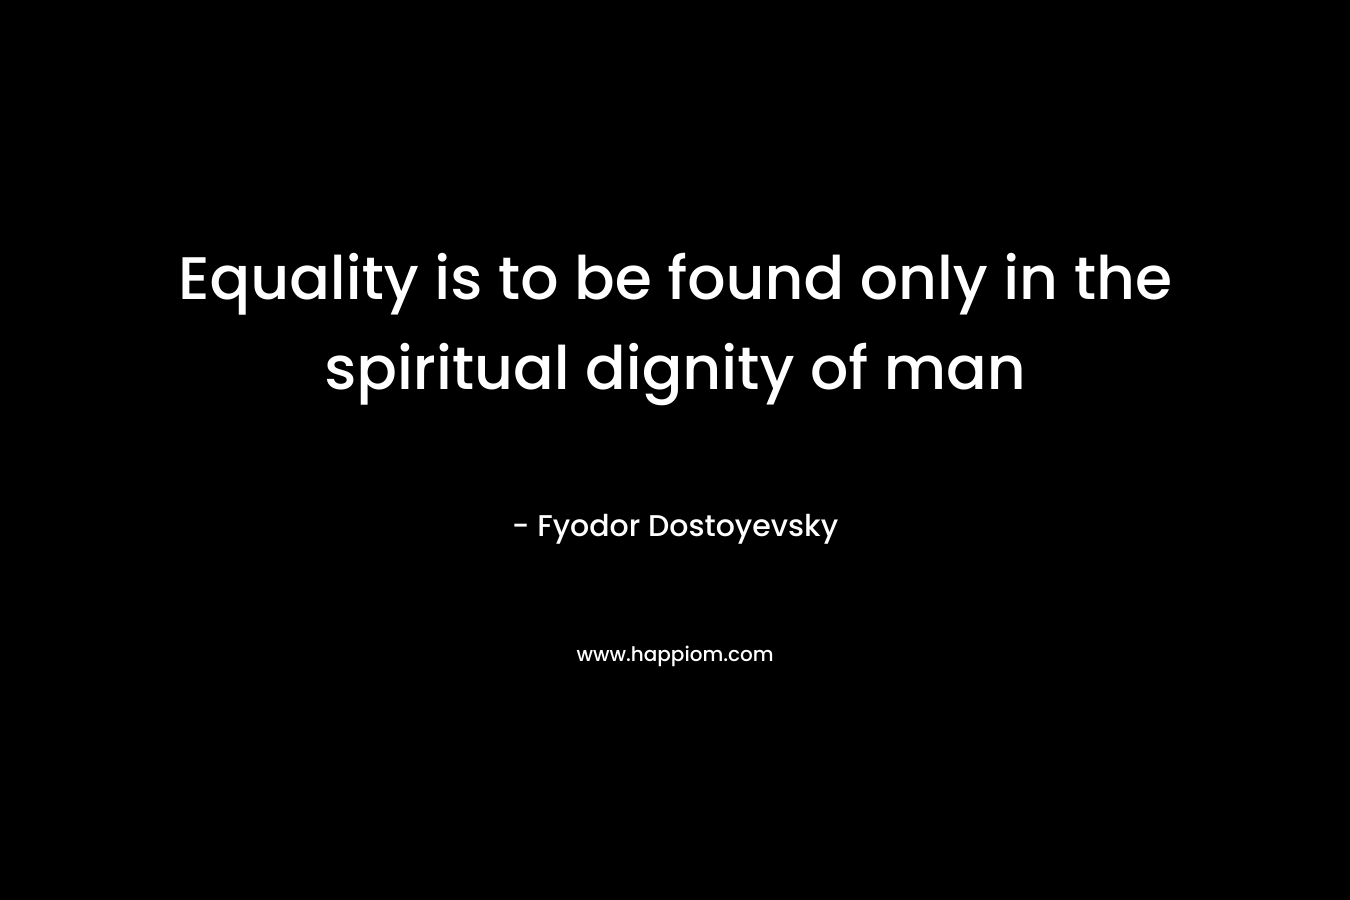 Equality is to be found only in the spiritual dignity of man